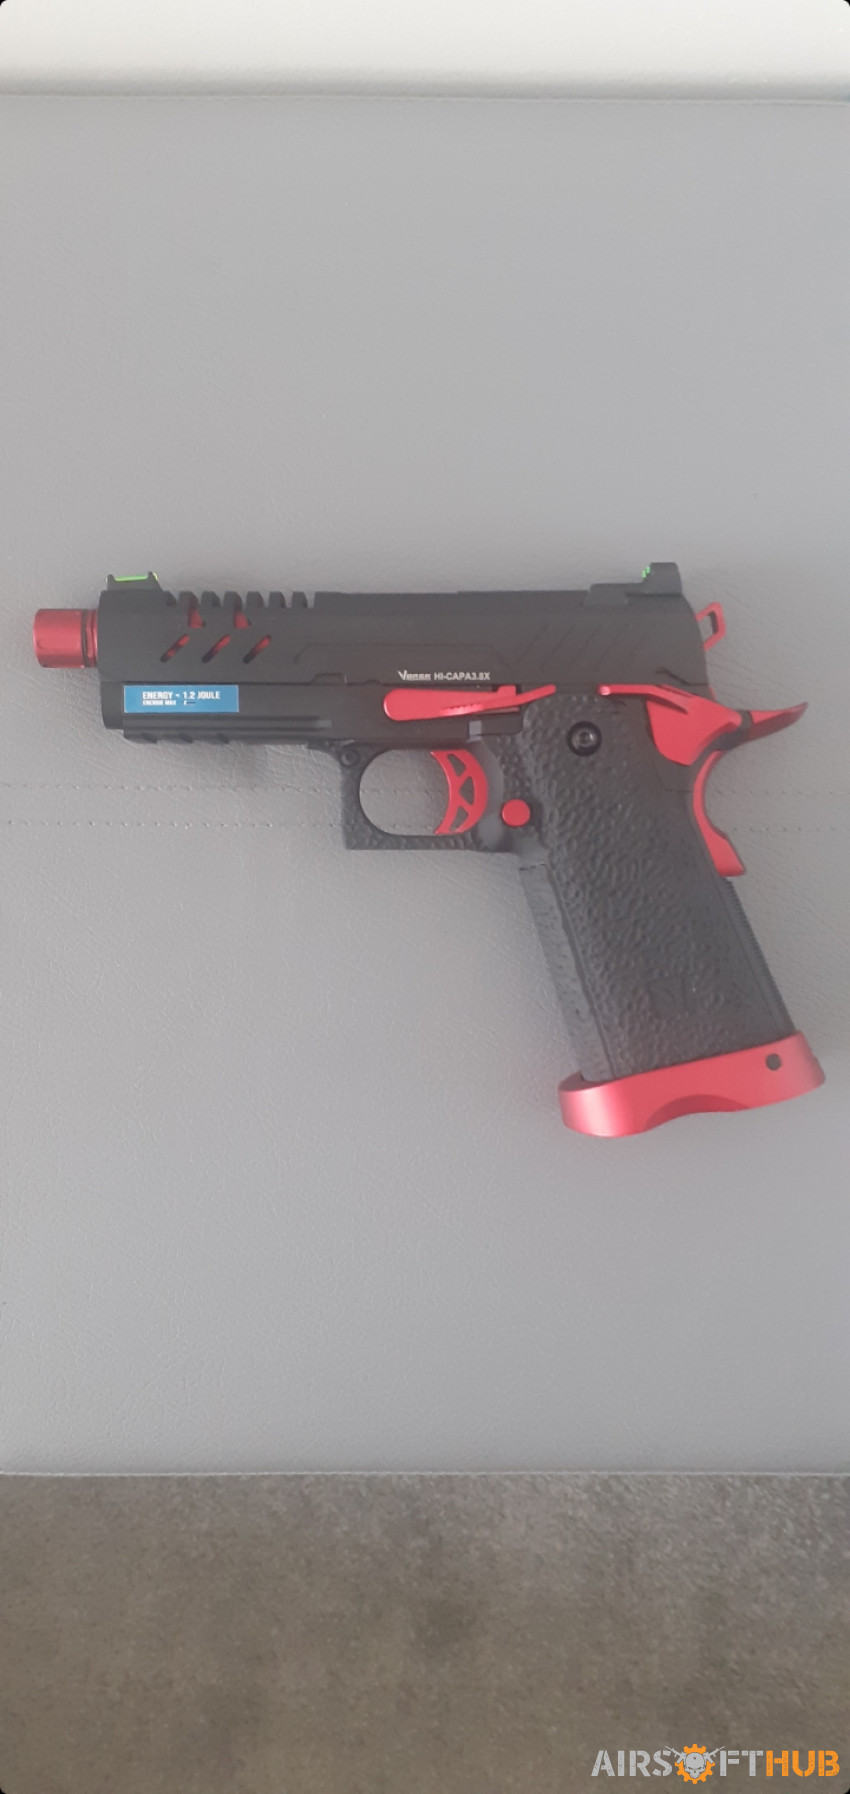 Vorsk 3.8 Pro Red Hi-Capa GBB - Used airsoft equipment